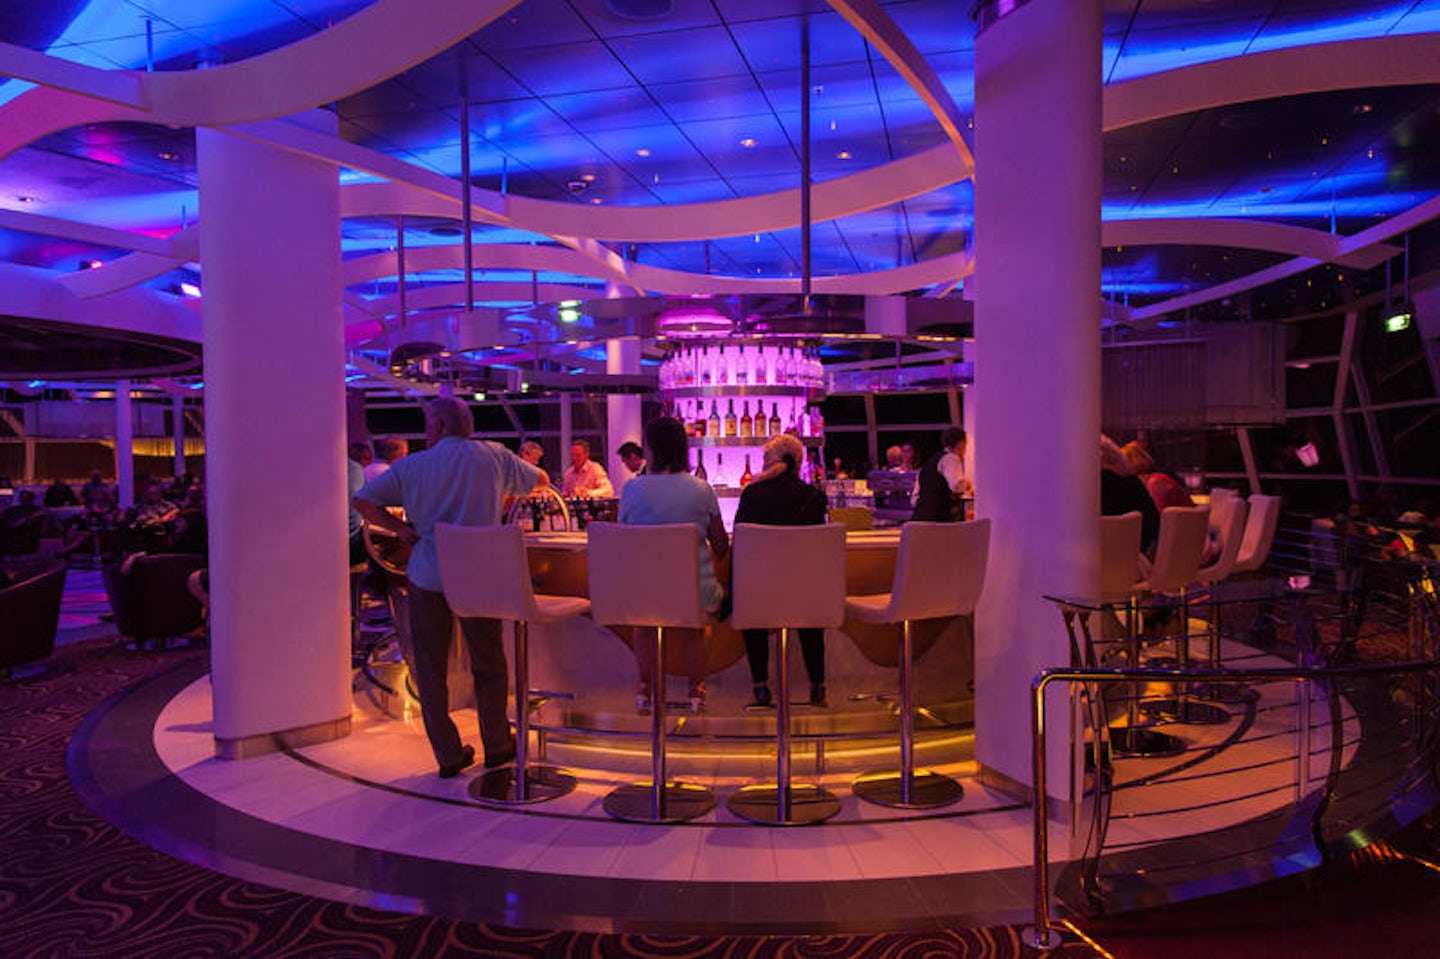 The 80s Party on Celebrity Equinox